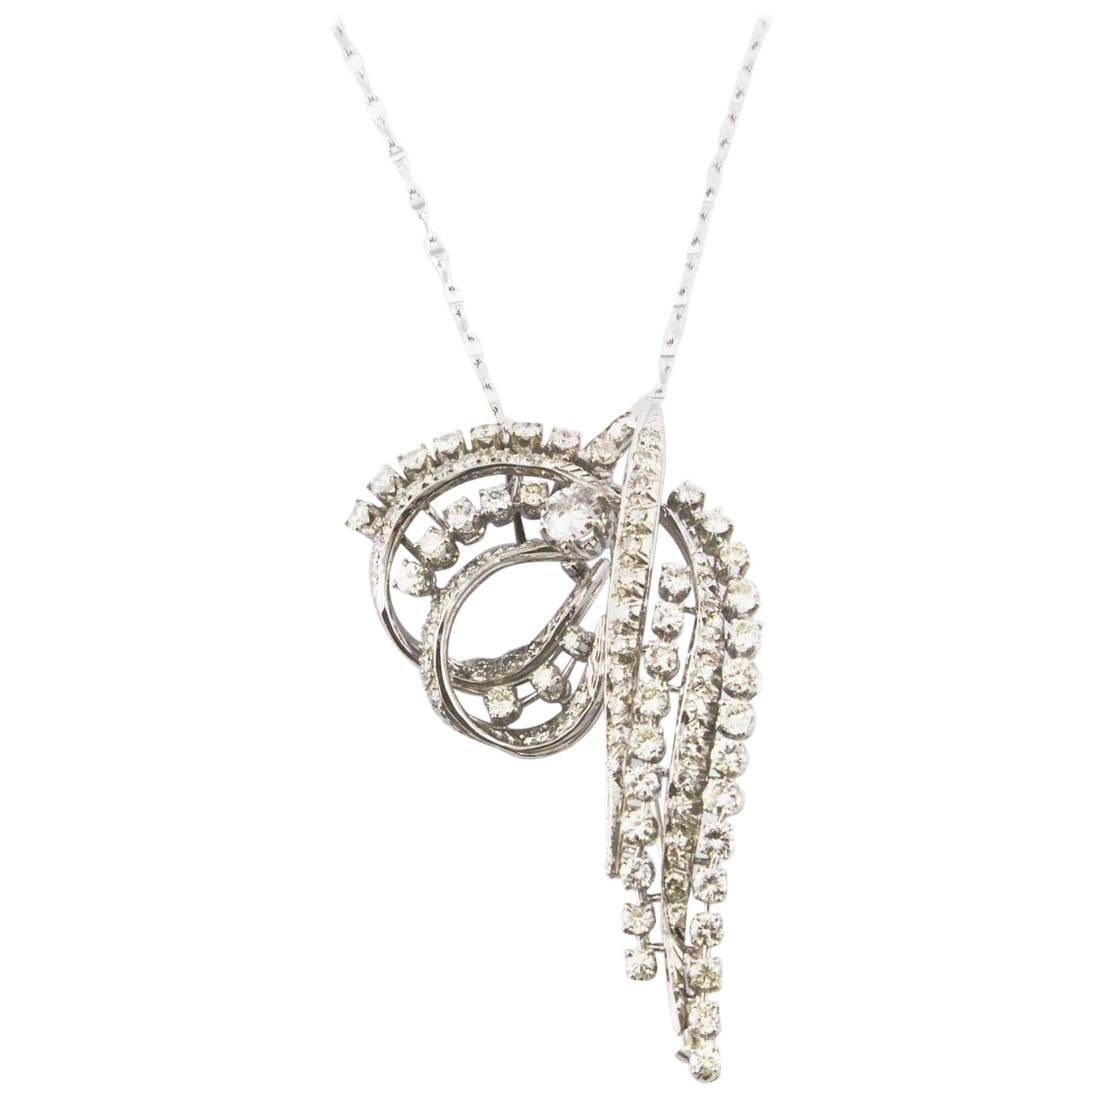 Sparkling Pendant Necklace/Brooch with Carat 2.50 Diamonds